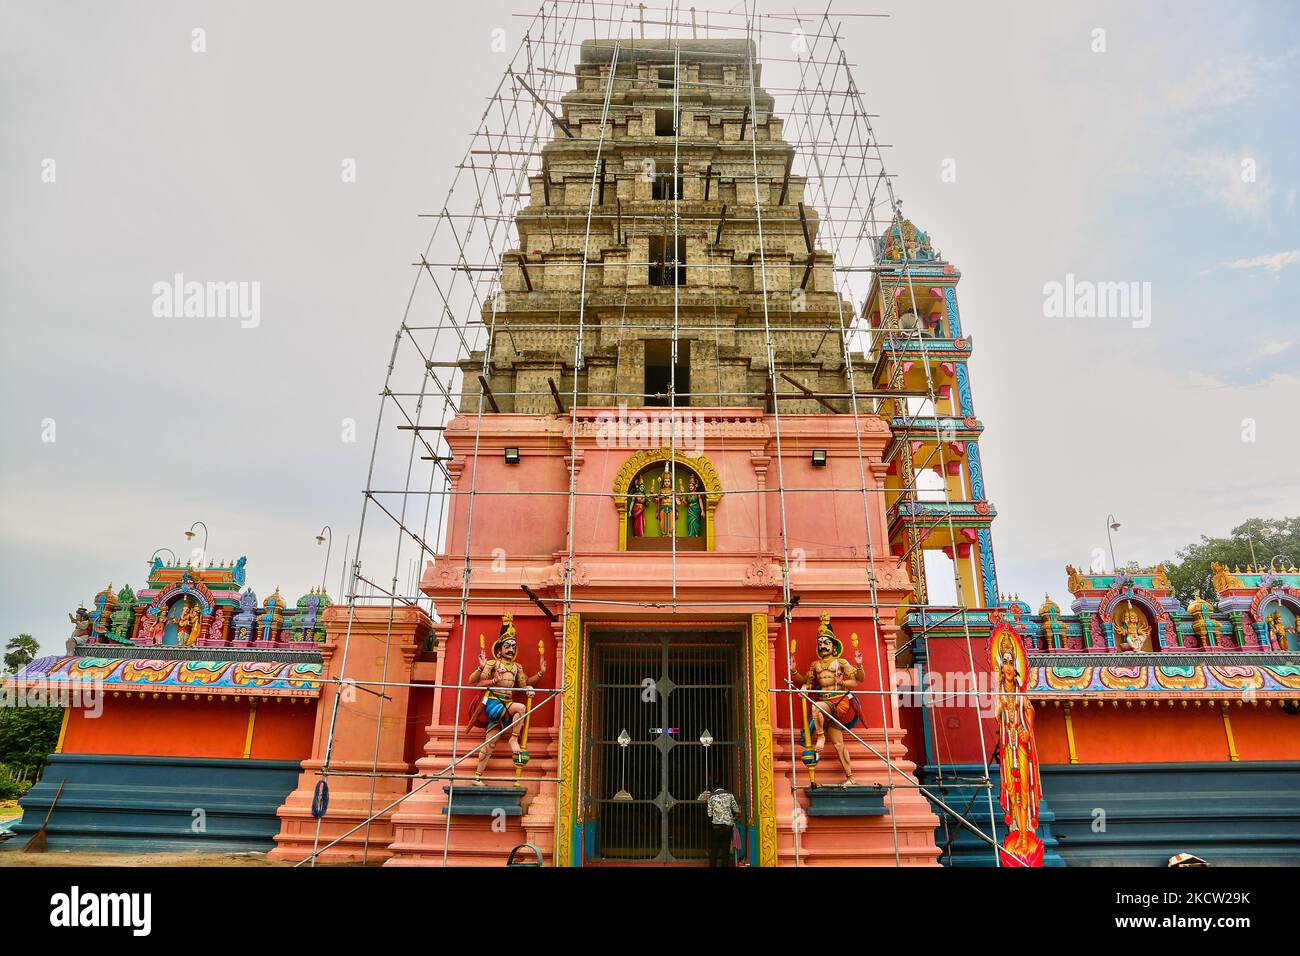 Scaffolding seen on a Hindu temple in Mullaitivu, Sri Lanka. This temple was known to have been frequented by Velupillai Prabhakaran, the deceased leader of the LTTE (Liberation Tigers of Tamil Eelam) fighters. The temple was damaged during bombing by the Sri Lankan army during the civil war and is now being rebuilt. (Photo by Creative Touch Imaging Ltd./NurPhoto) Stock Photo